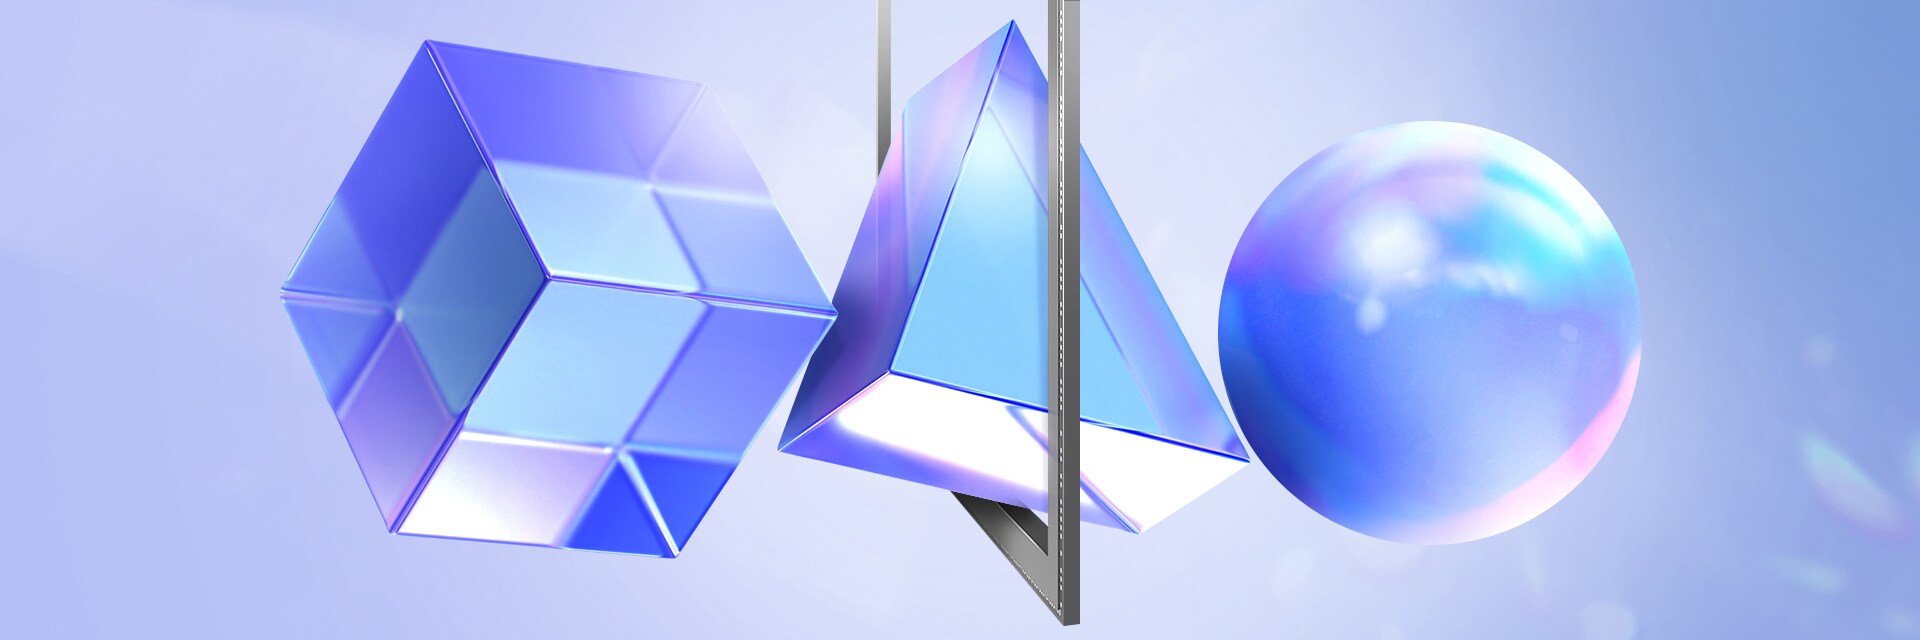 Promotional graphic for ISOCELL JN5 Mobile Image Sensor, with a phrase 'Take your pic', featuring a cube, a pyramid, and a sphere in a blue and purple color scheme.